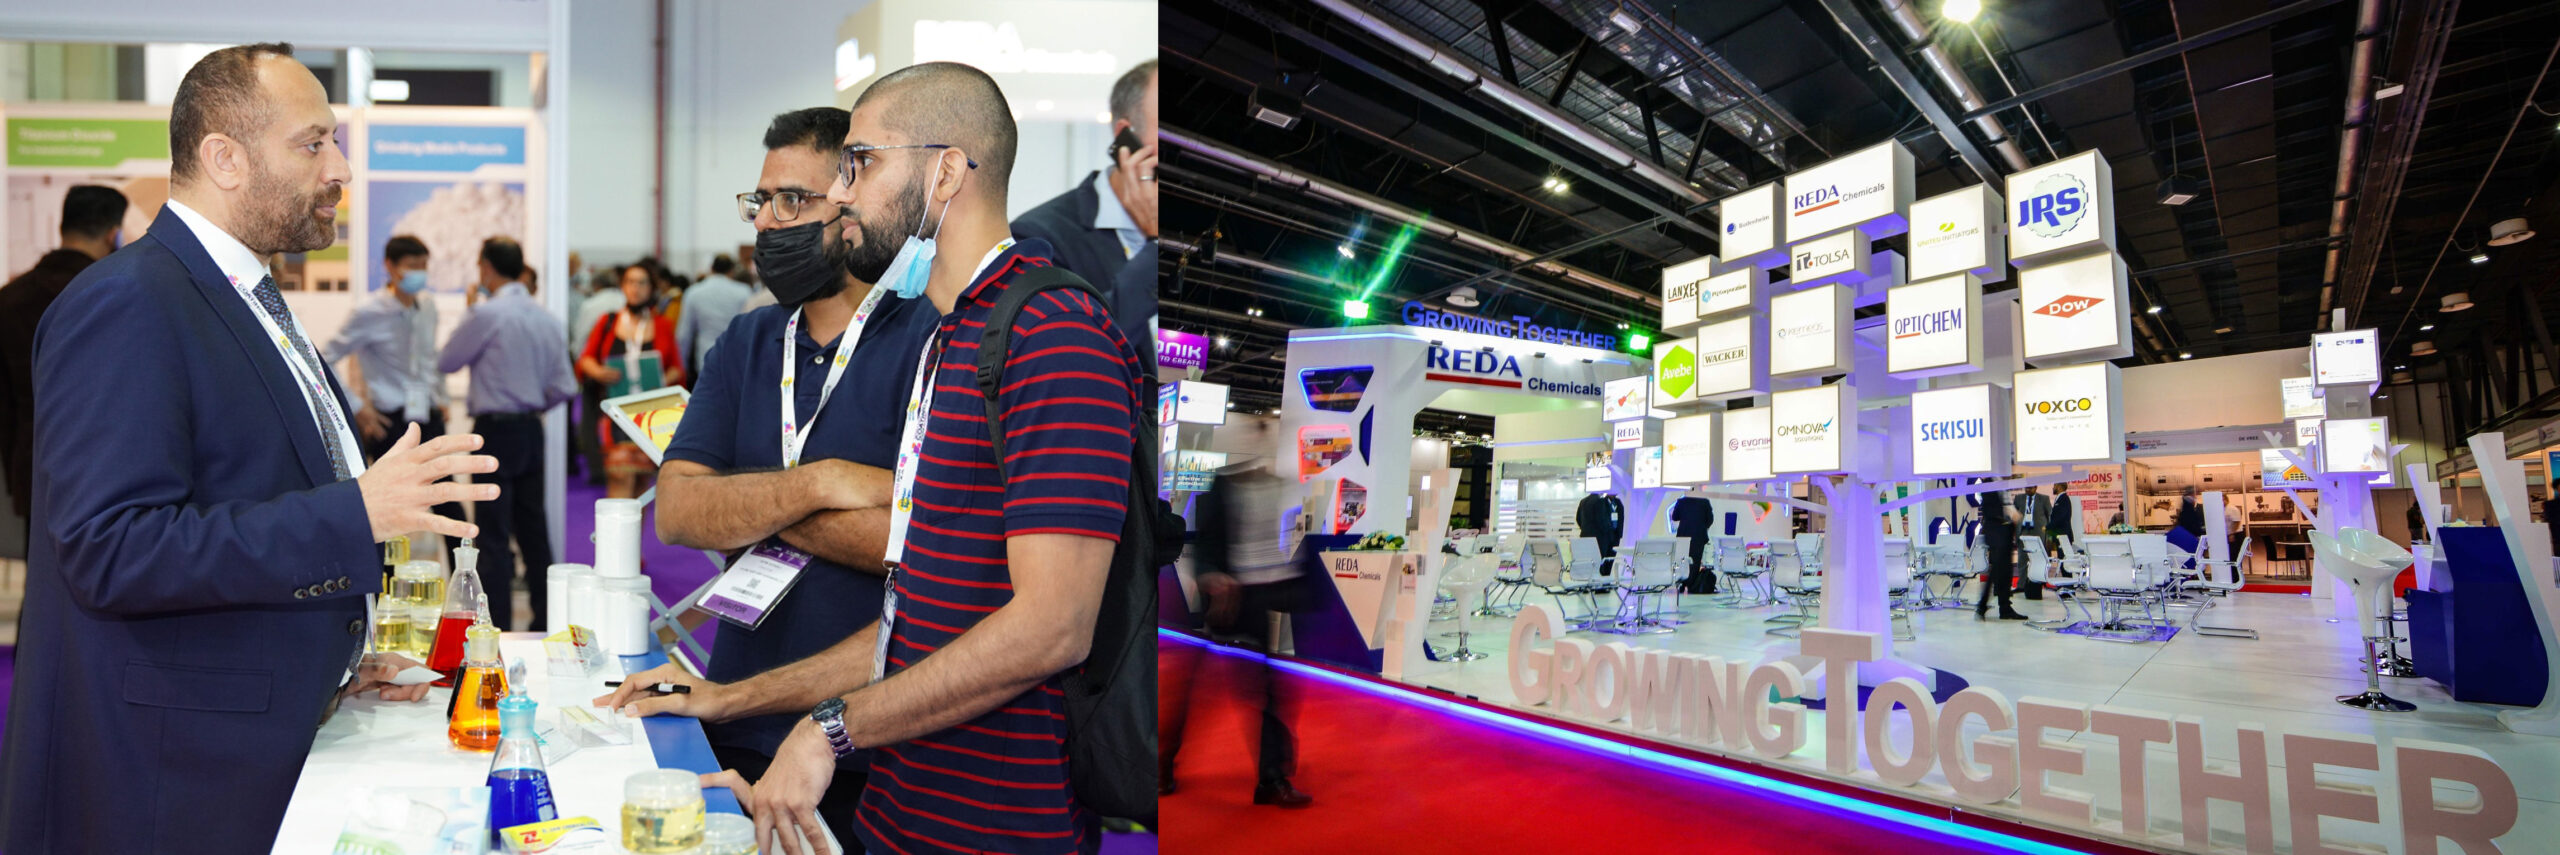 Middle East Coatings Show: An Excellent Networking Event